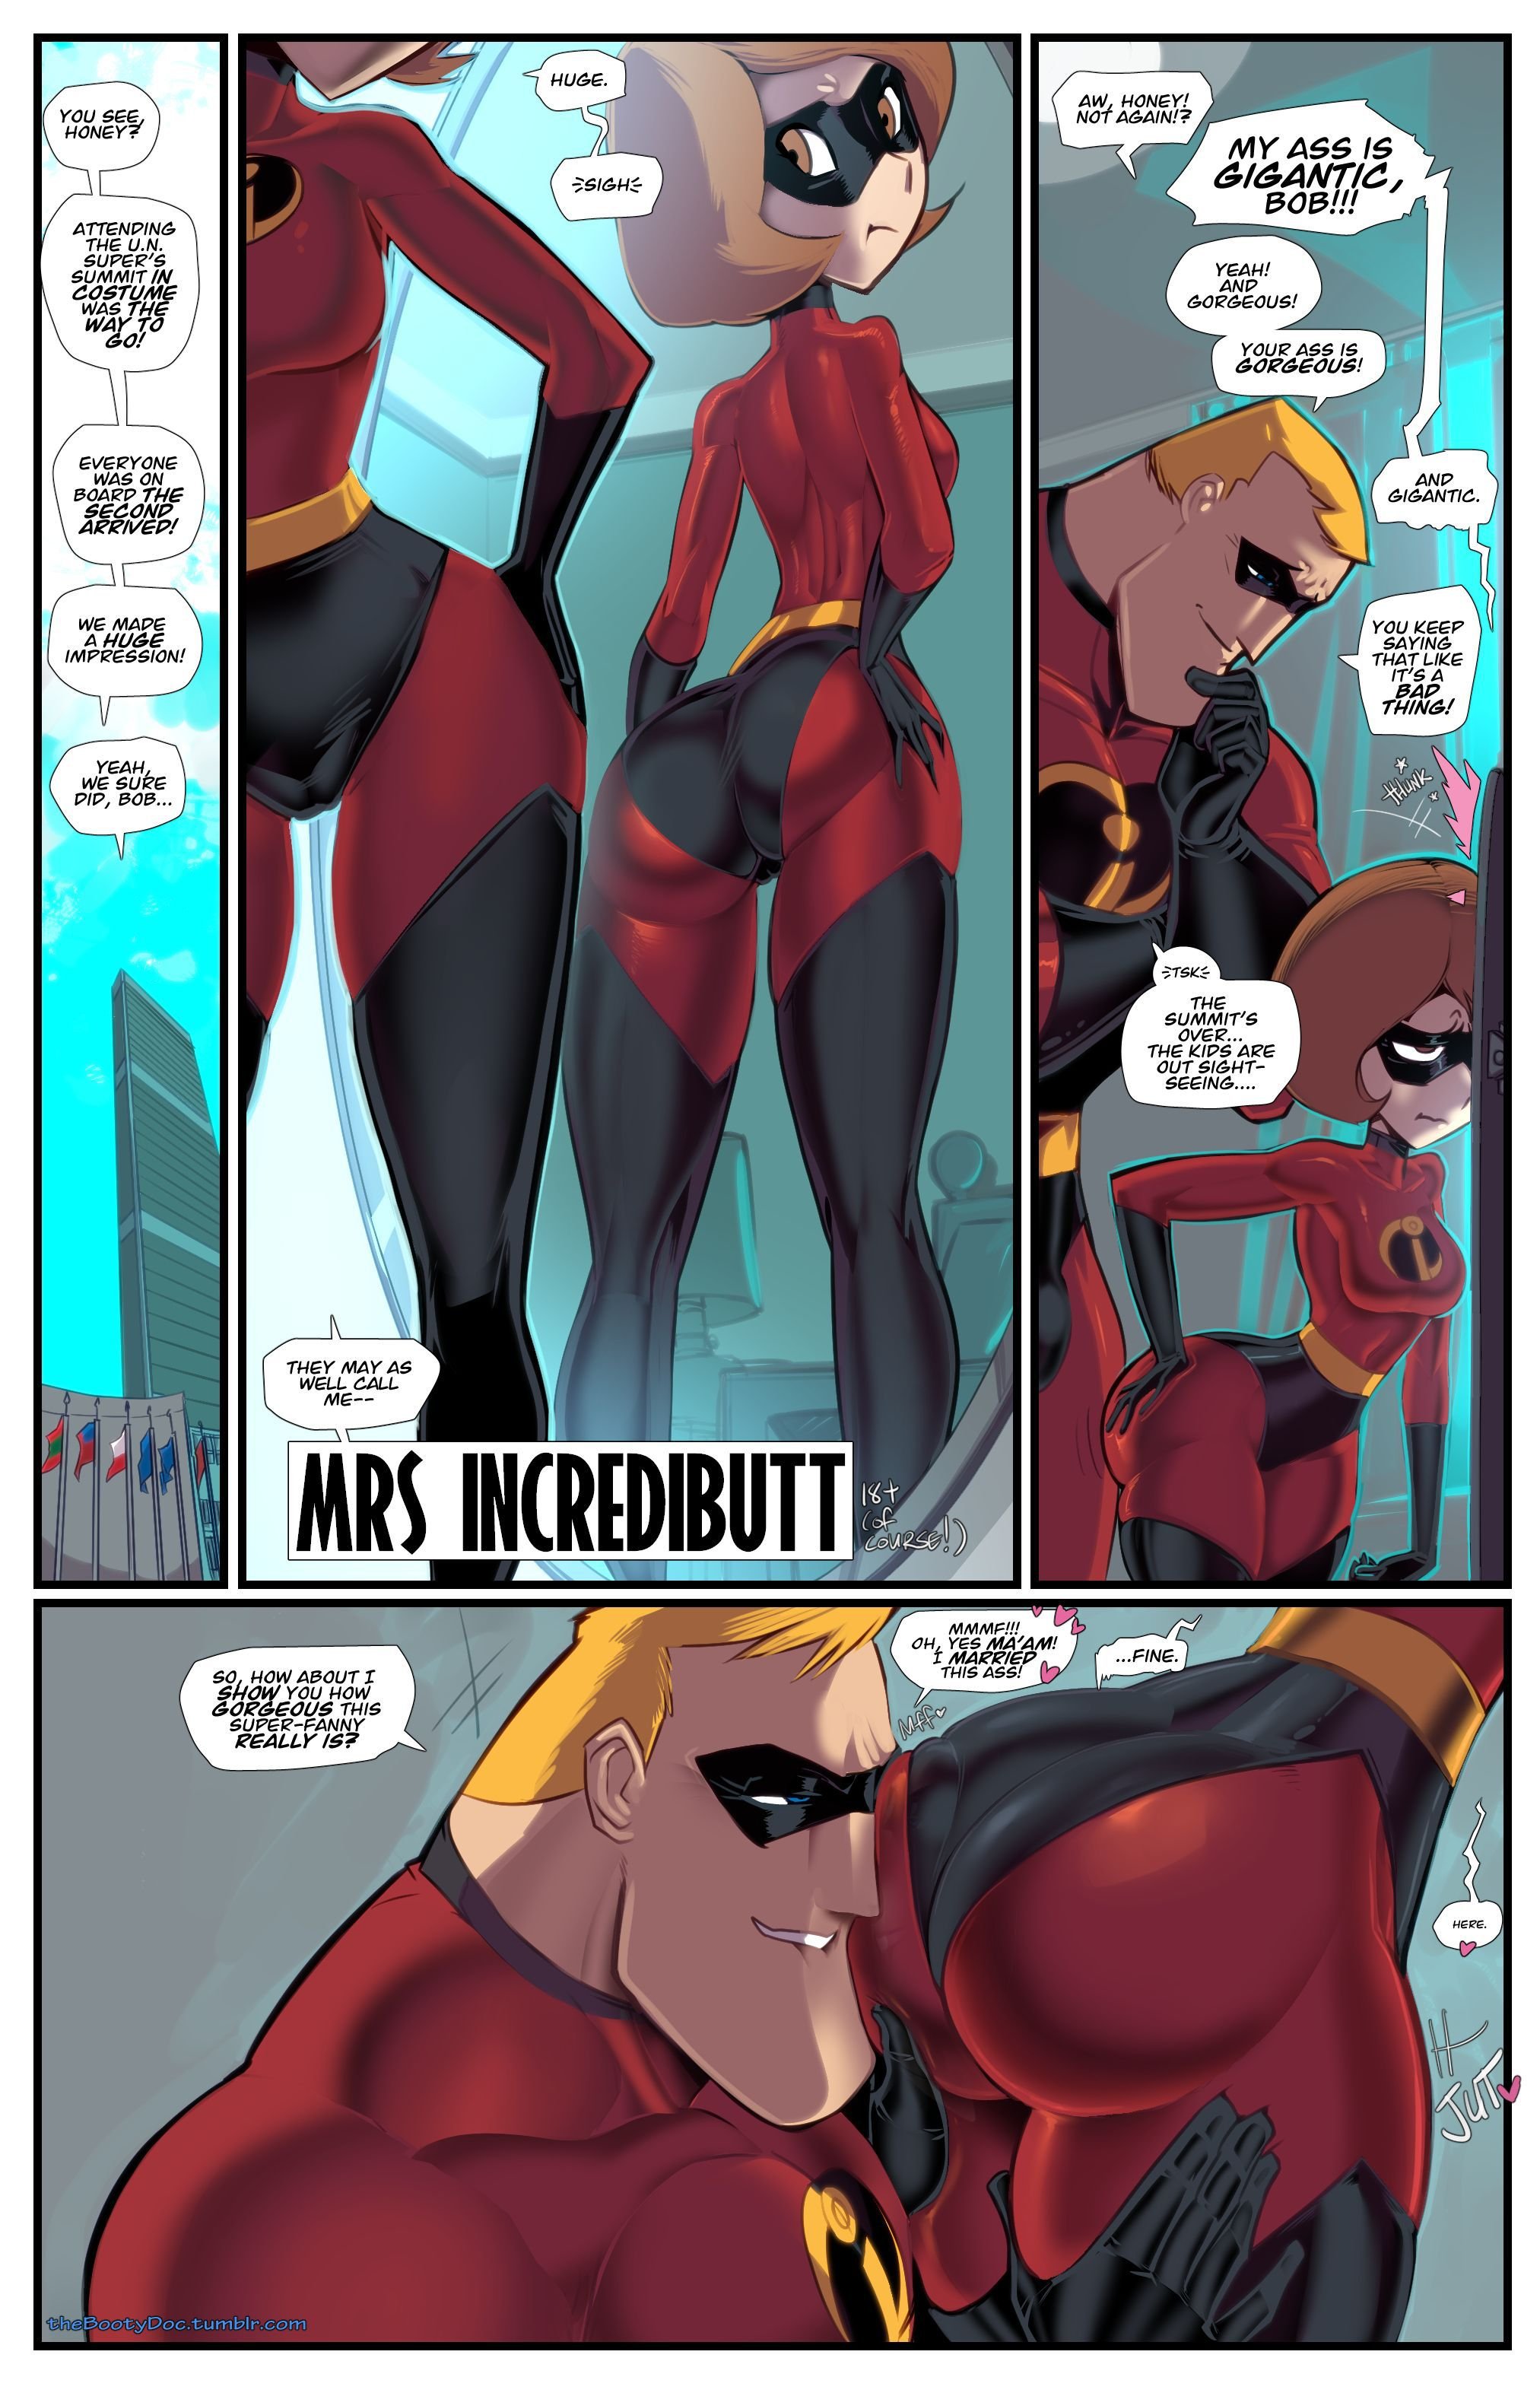 Mrs. Incredibutt (The Incredibles) [Fred Perry] - 1 . Mrs. Incredibutt -  Chapter 1 (The Incredibles) [Fred Perry] - AllPornComic